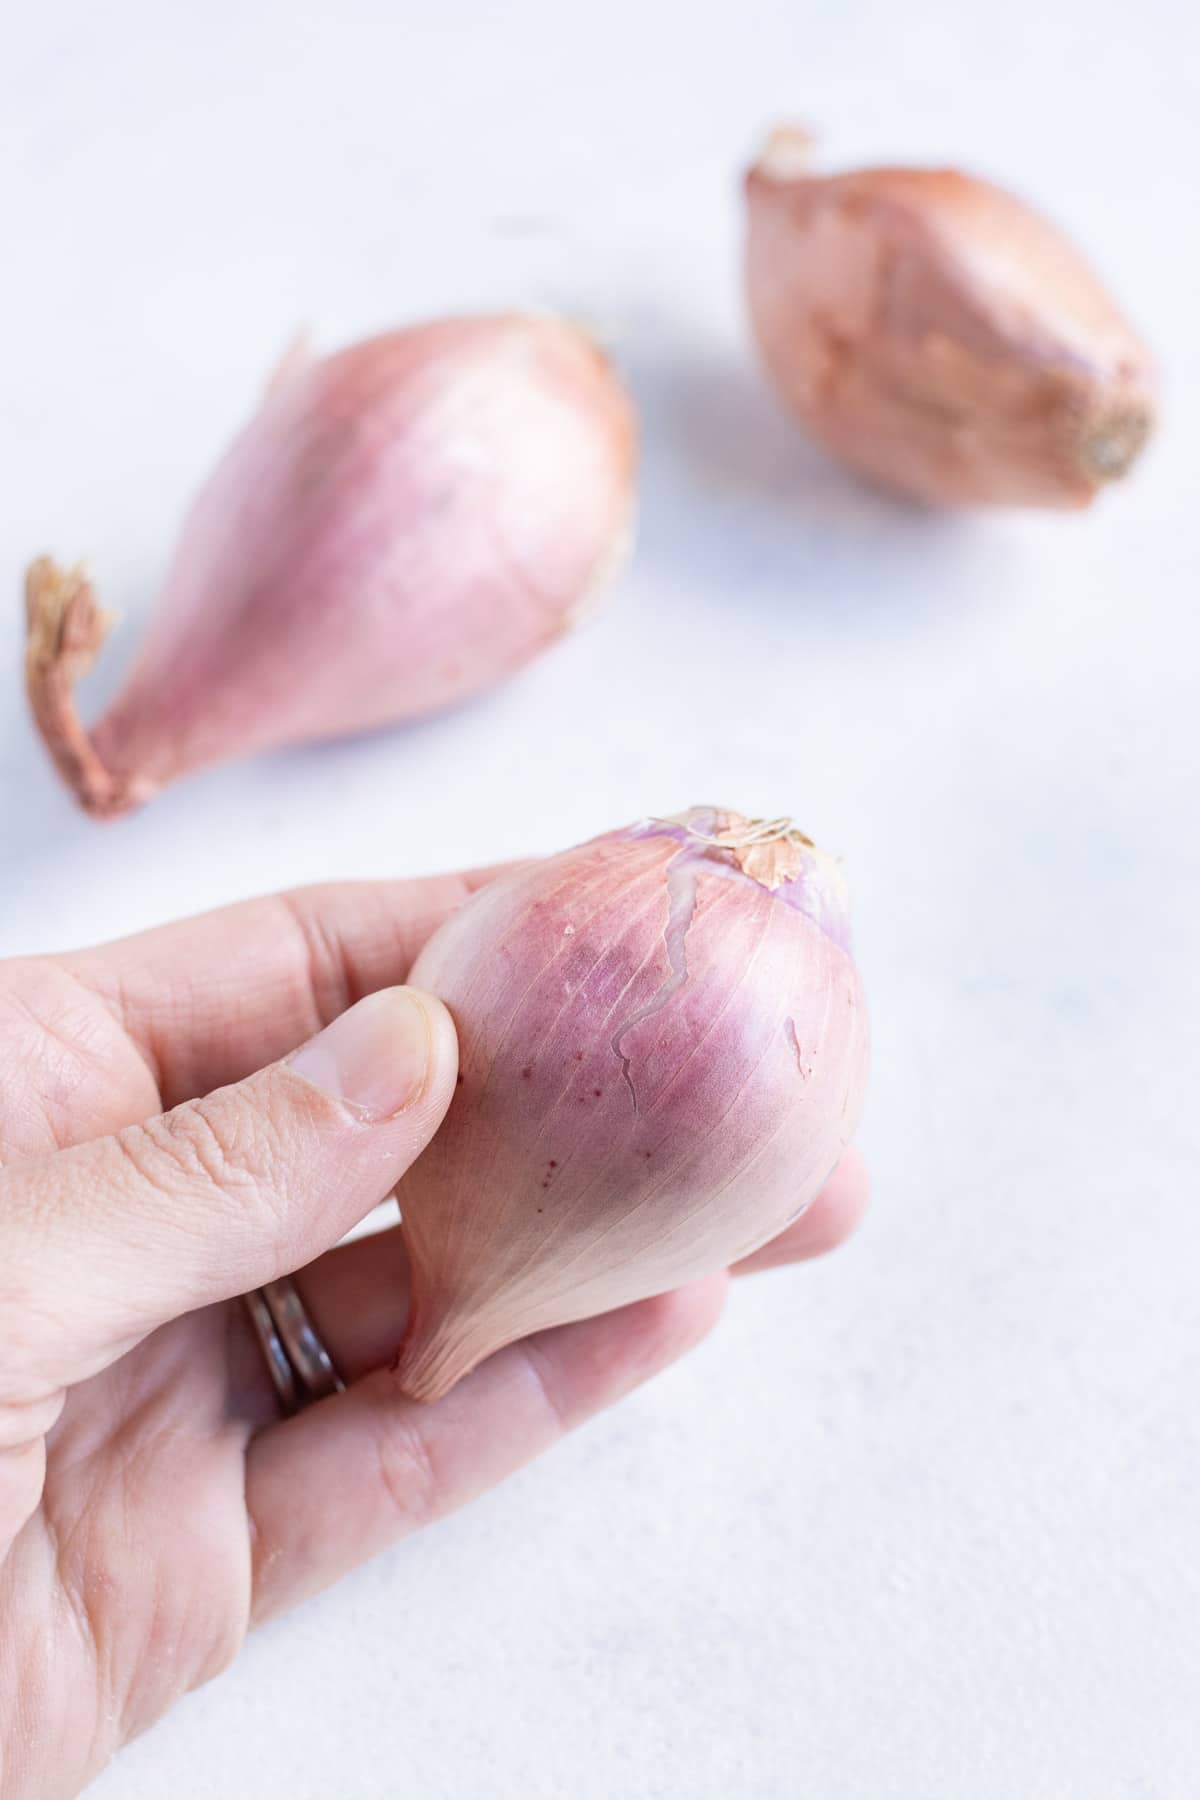 A shallot is picked up by a hand.